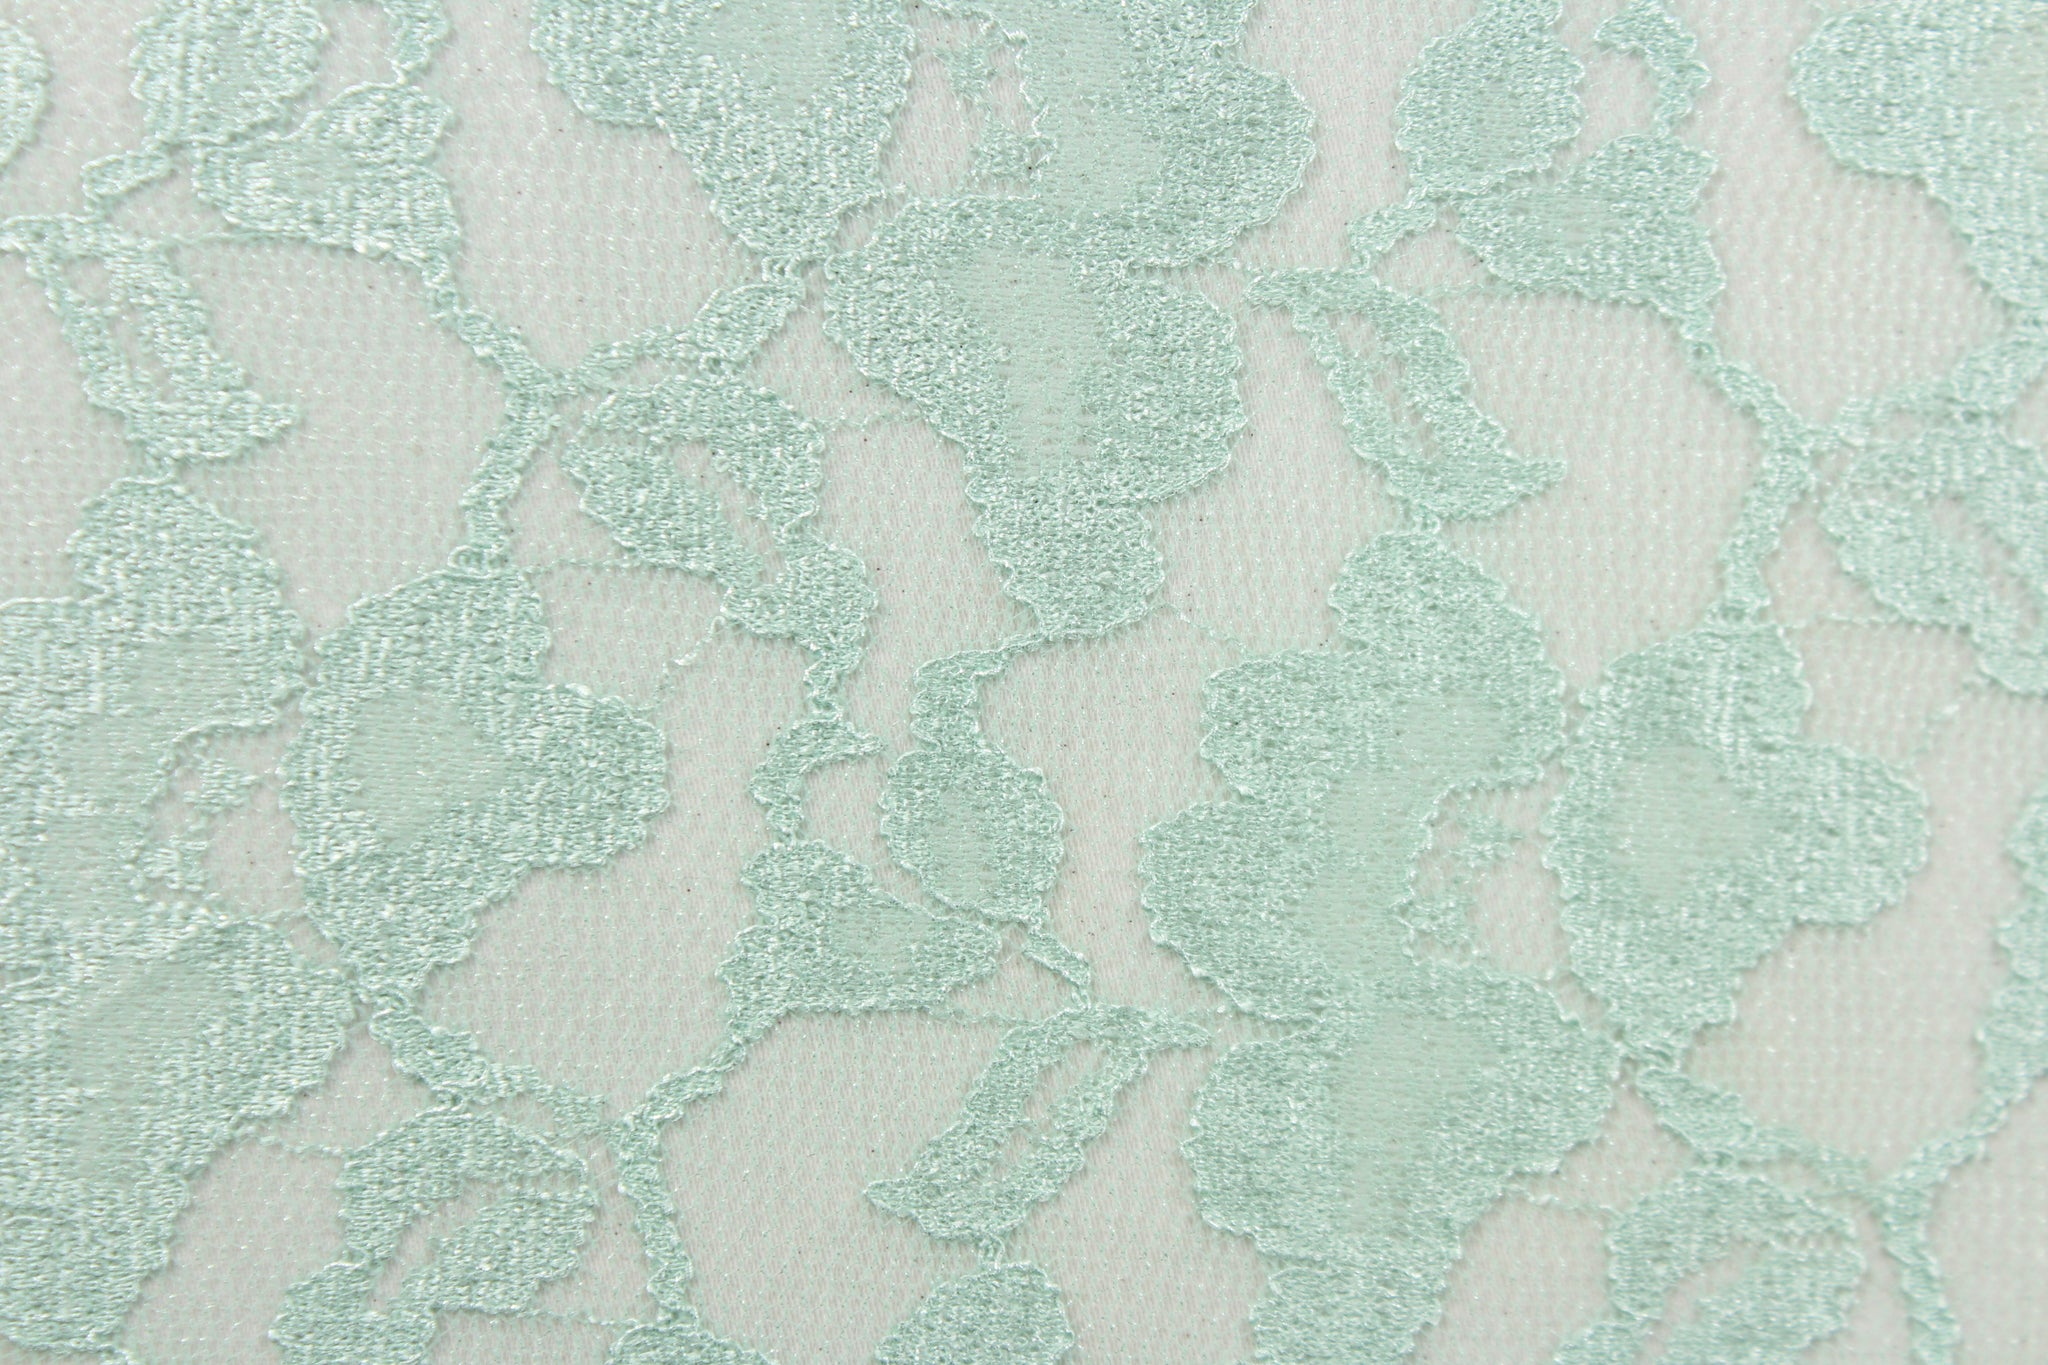 Mint Green Lace  Wedding mint green, Stretch lace fabric, Lace fabric